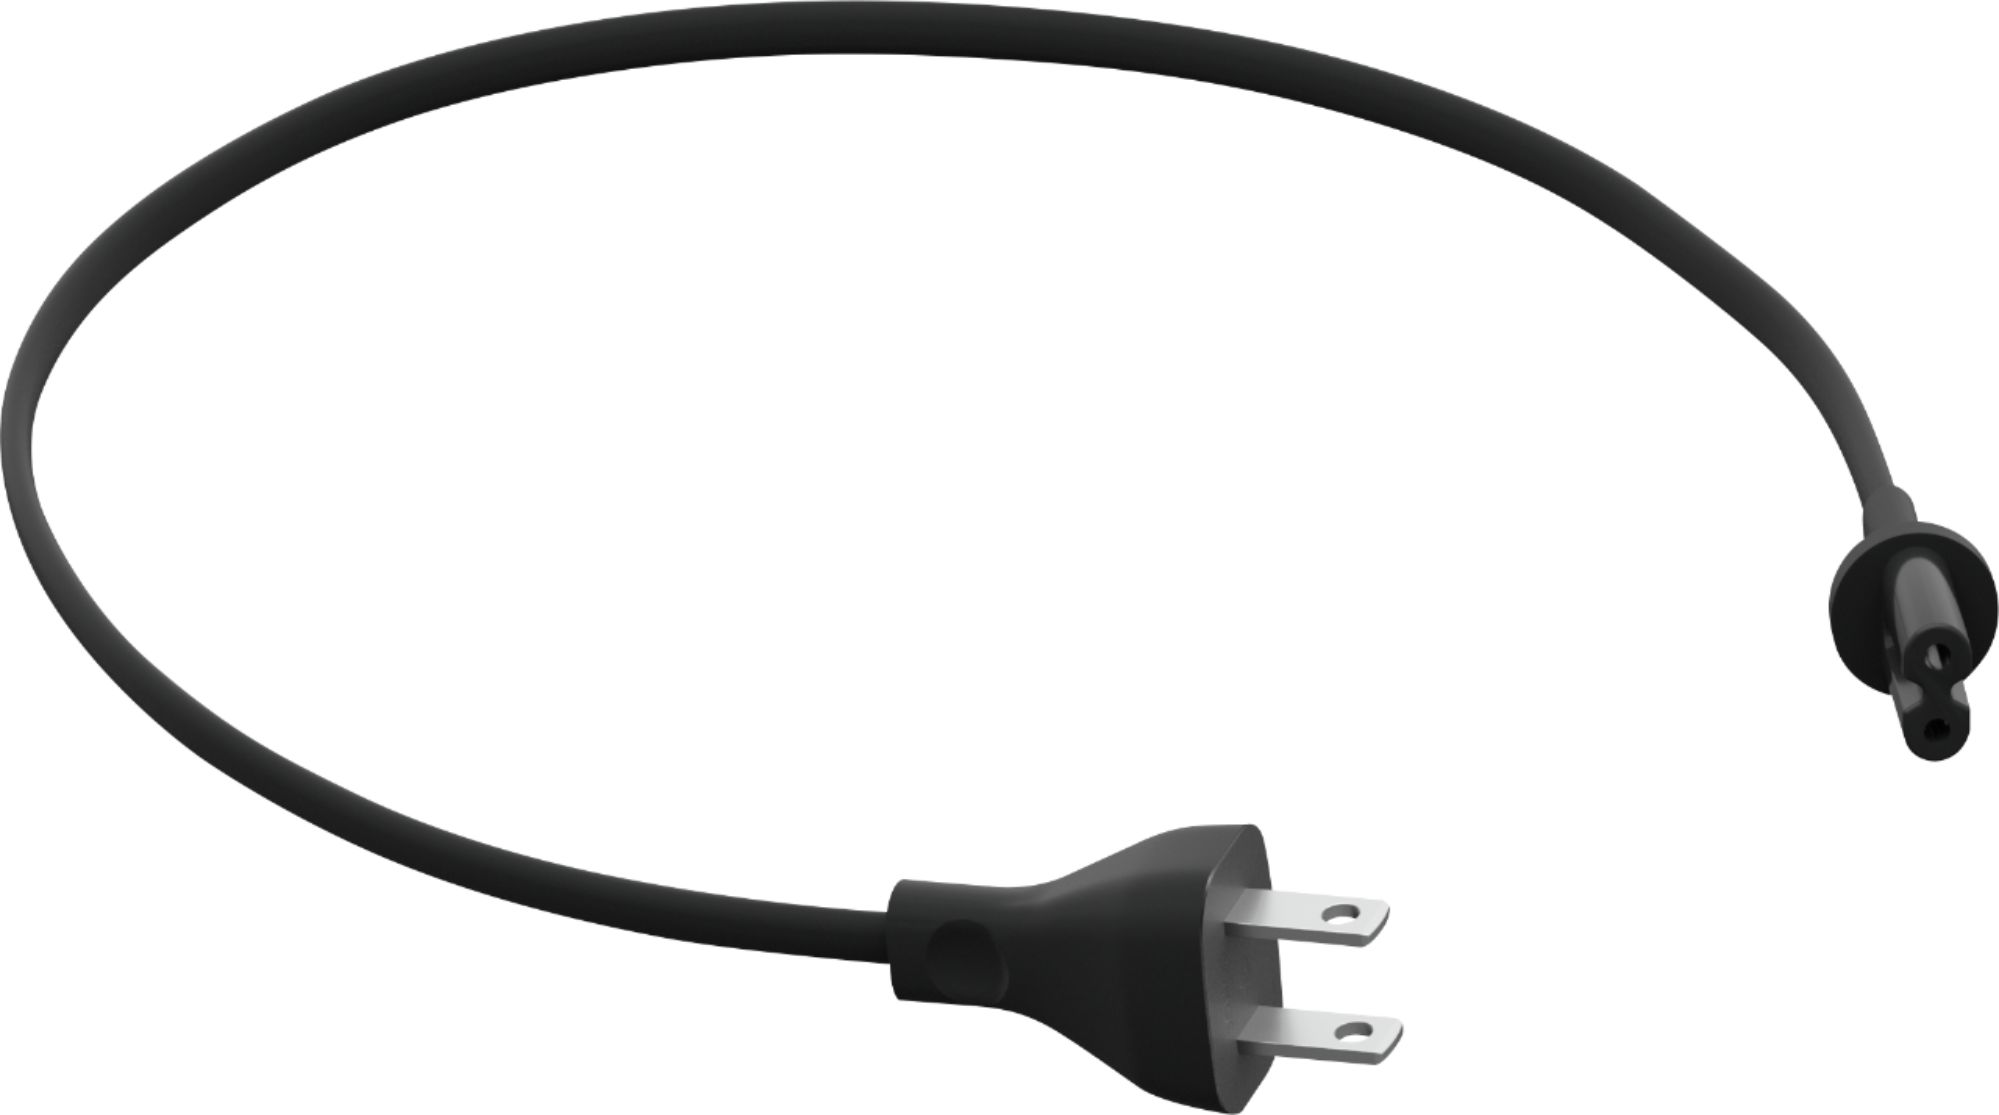 At blokere Tage en risiko Magtfulde Best Buy: Sonos 1.6' Power Cable for Play:5, Beam and Amp Black PC70SUS1BLK